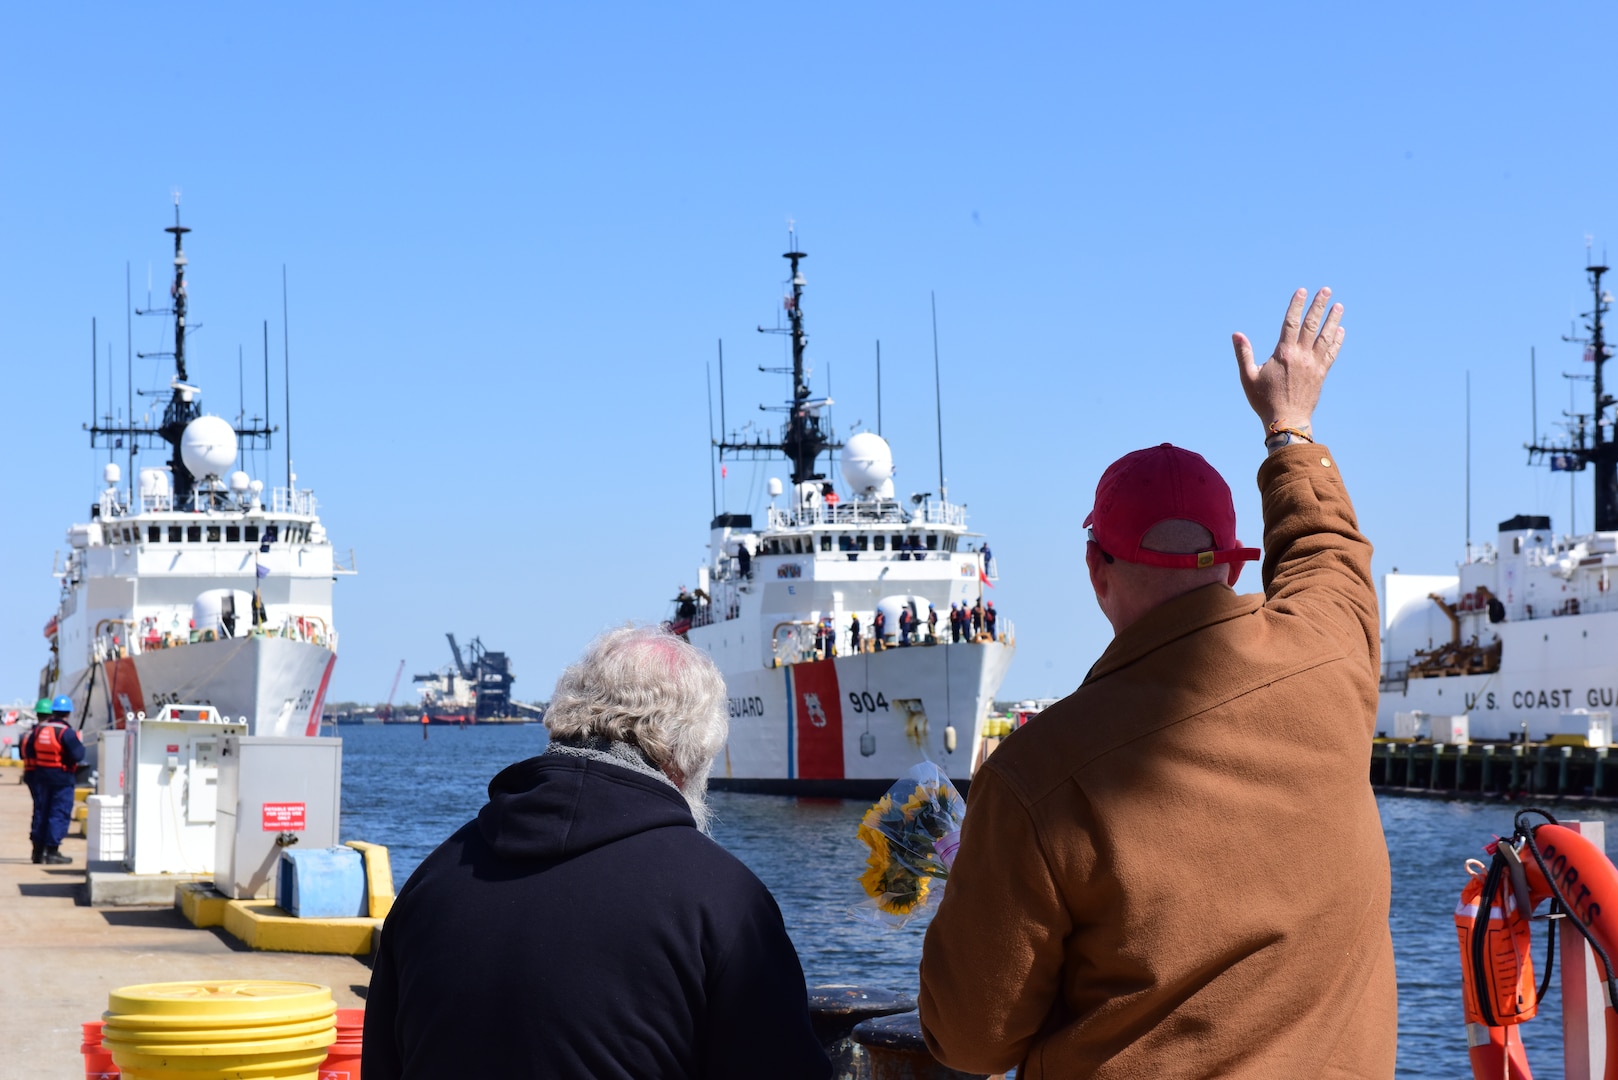 USCGC Northland (WMEC 904) approaches the pier, March 30, 2023 in Portsmouth, Virginia. Northland conducted a 62-day maritime safety and security deployment in the Florida Straits and Windward Passage while patrolling in support of Homeland Security Task Force – Southeast and Operation Vigilant Sentry. (U.S. Coast Guard photo by Petty Officer 2nd Class Brandon Hillard)